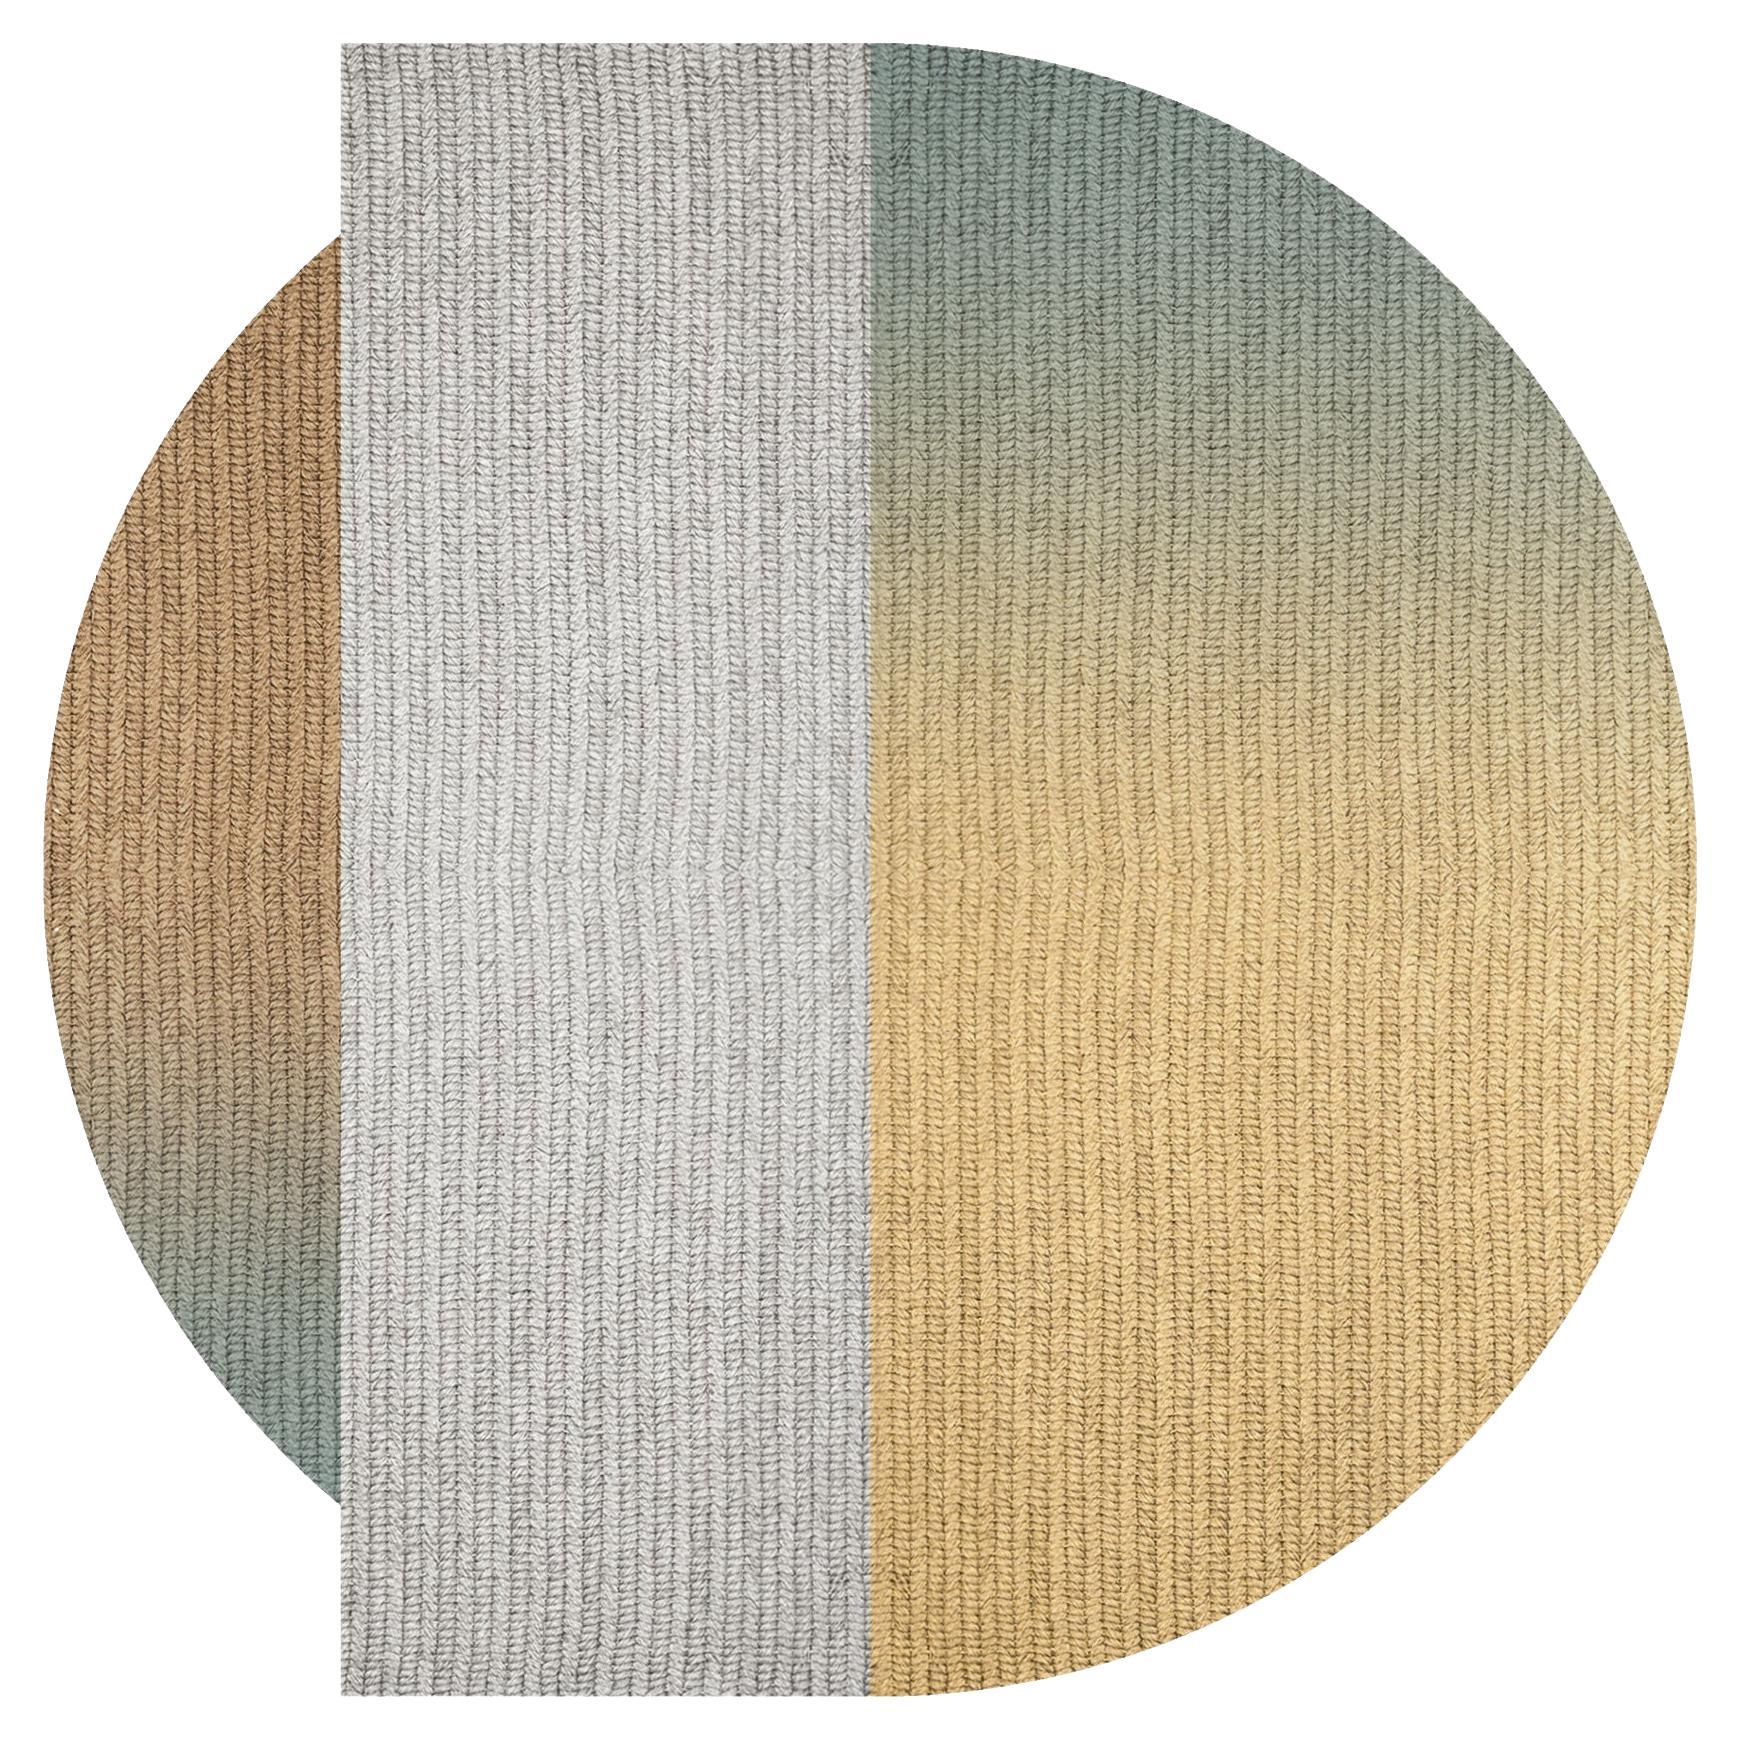 'Flux' Rug in Abaca, Colour 'Sterling', by Claire Vos for Musett Design For Sale